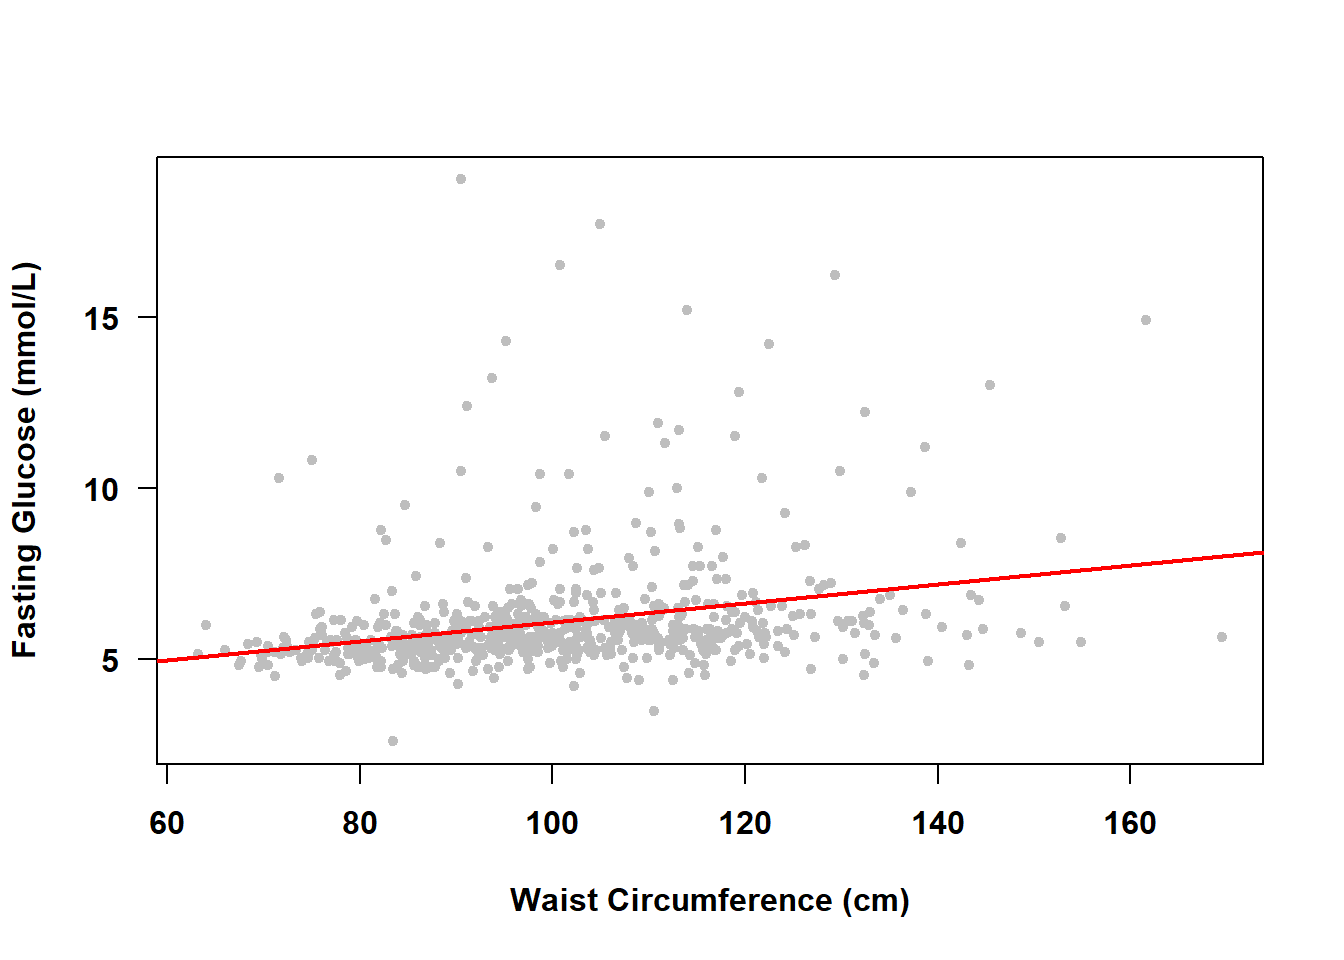 Simple linear regression of fasting glucose on waist circumference